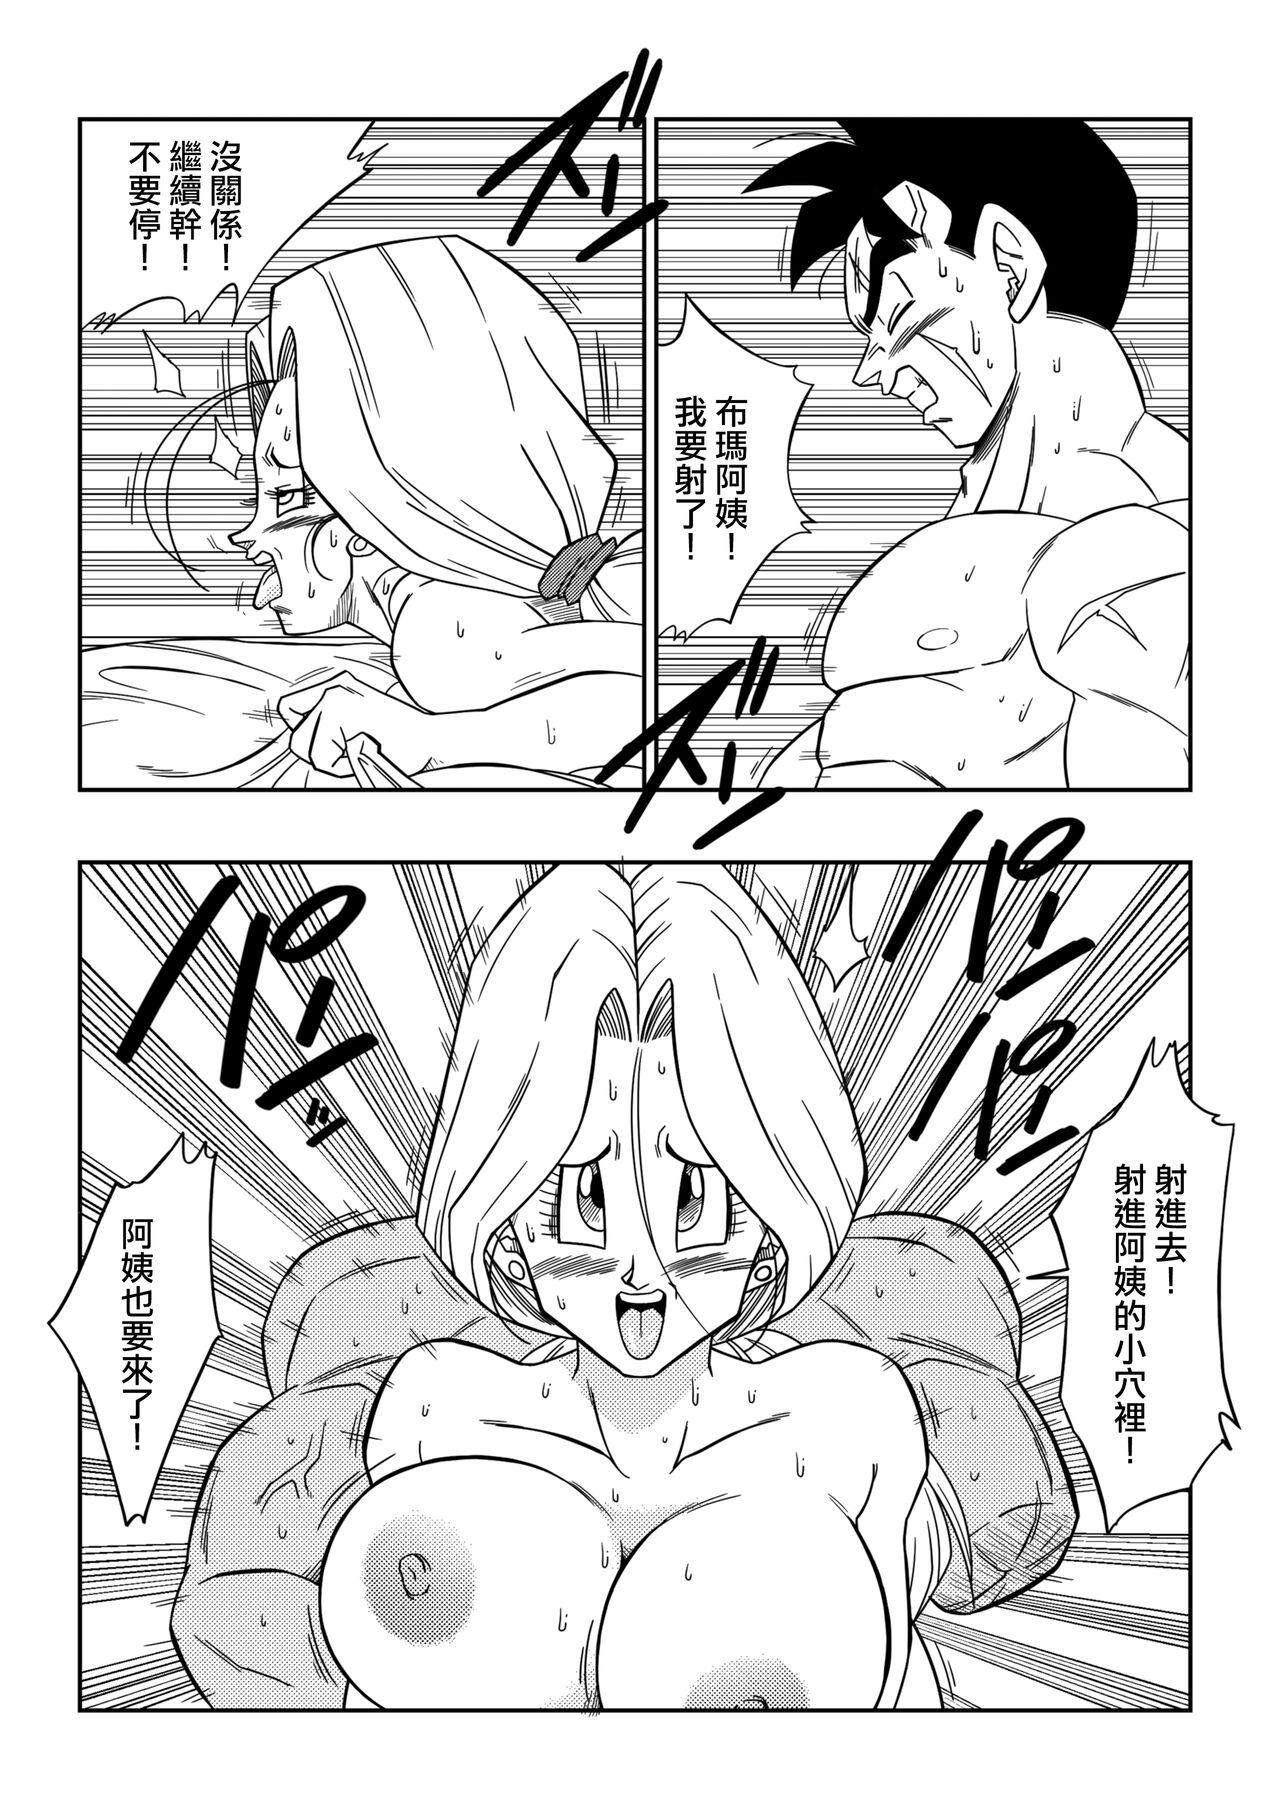 Homemade Lost of sex in this Future! - BULMA and GOHAN - Dragon ball z Best Blowjob - Page 8